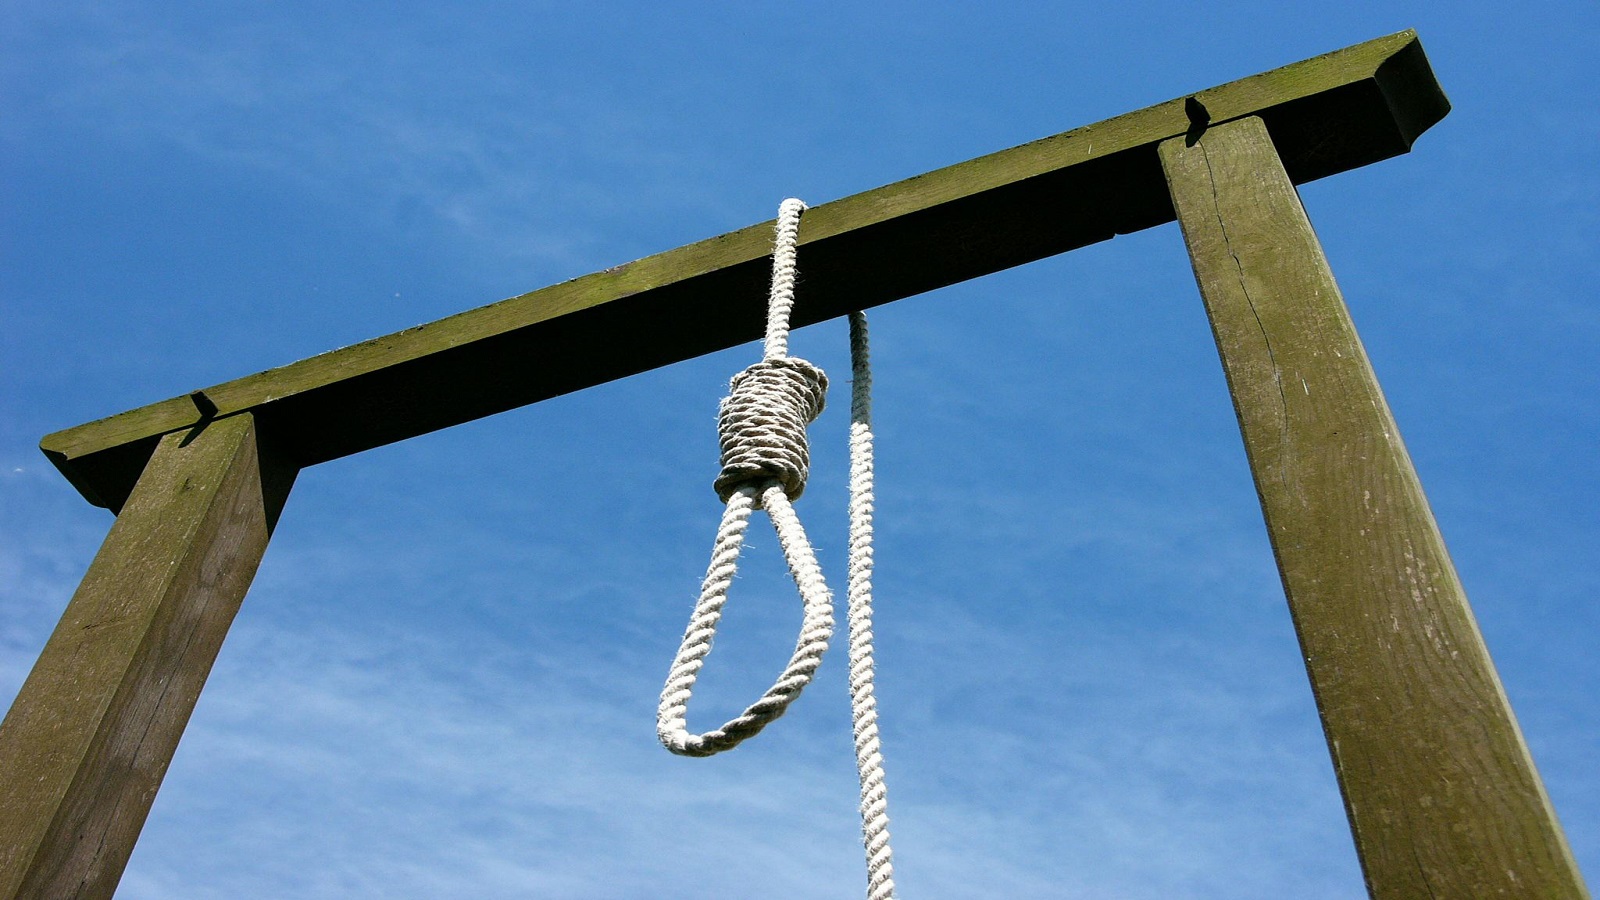 Iran Executed 75% More People in 2022 Than in Previous Years, Report Says